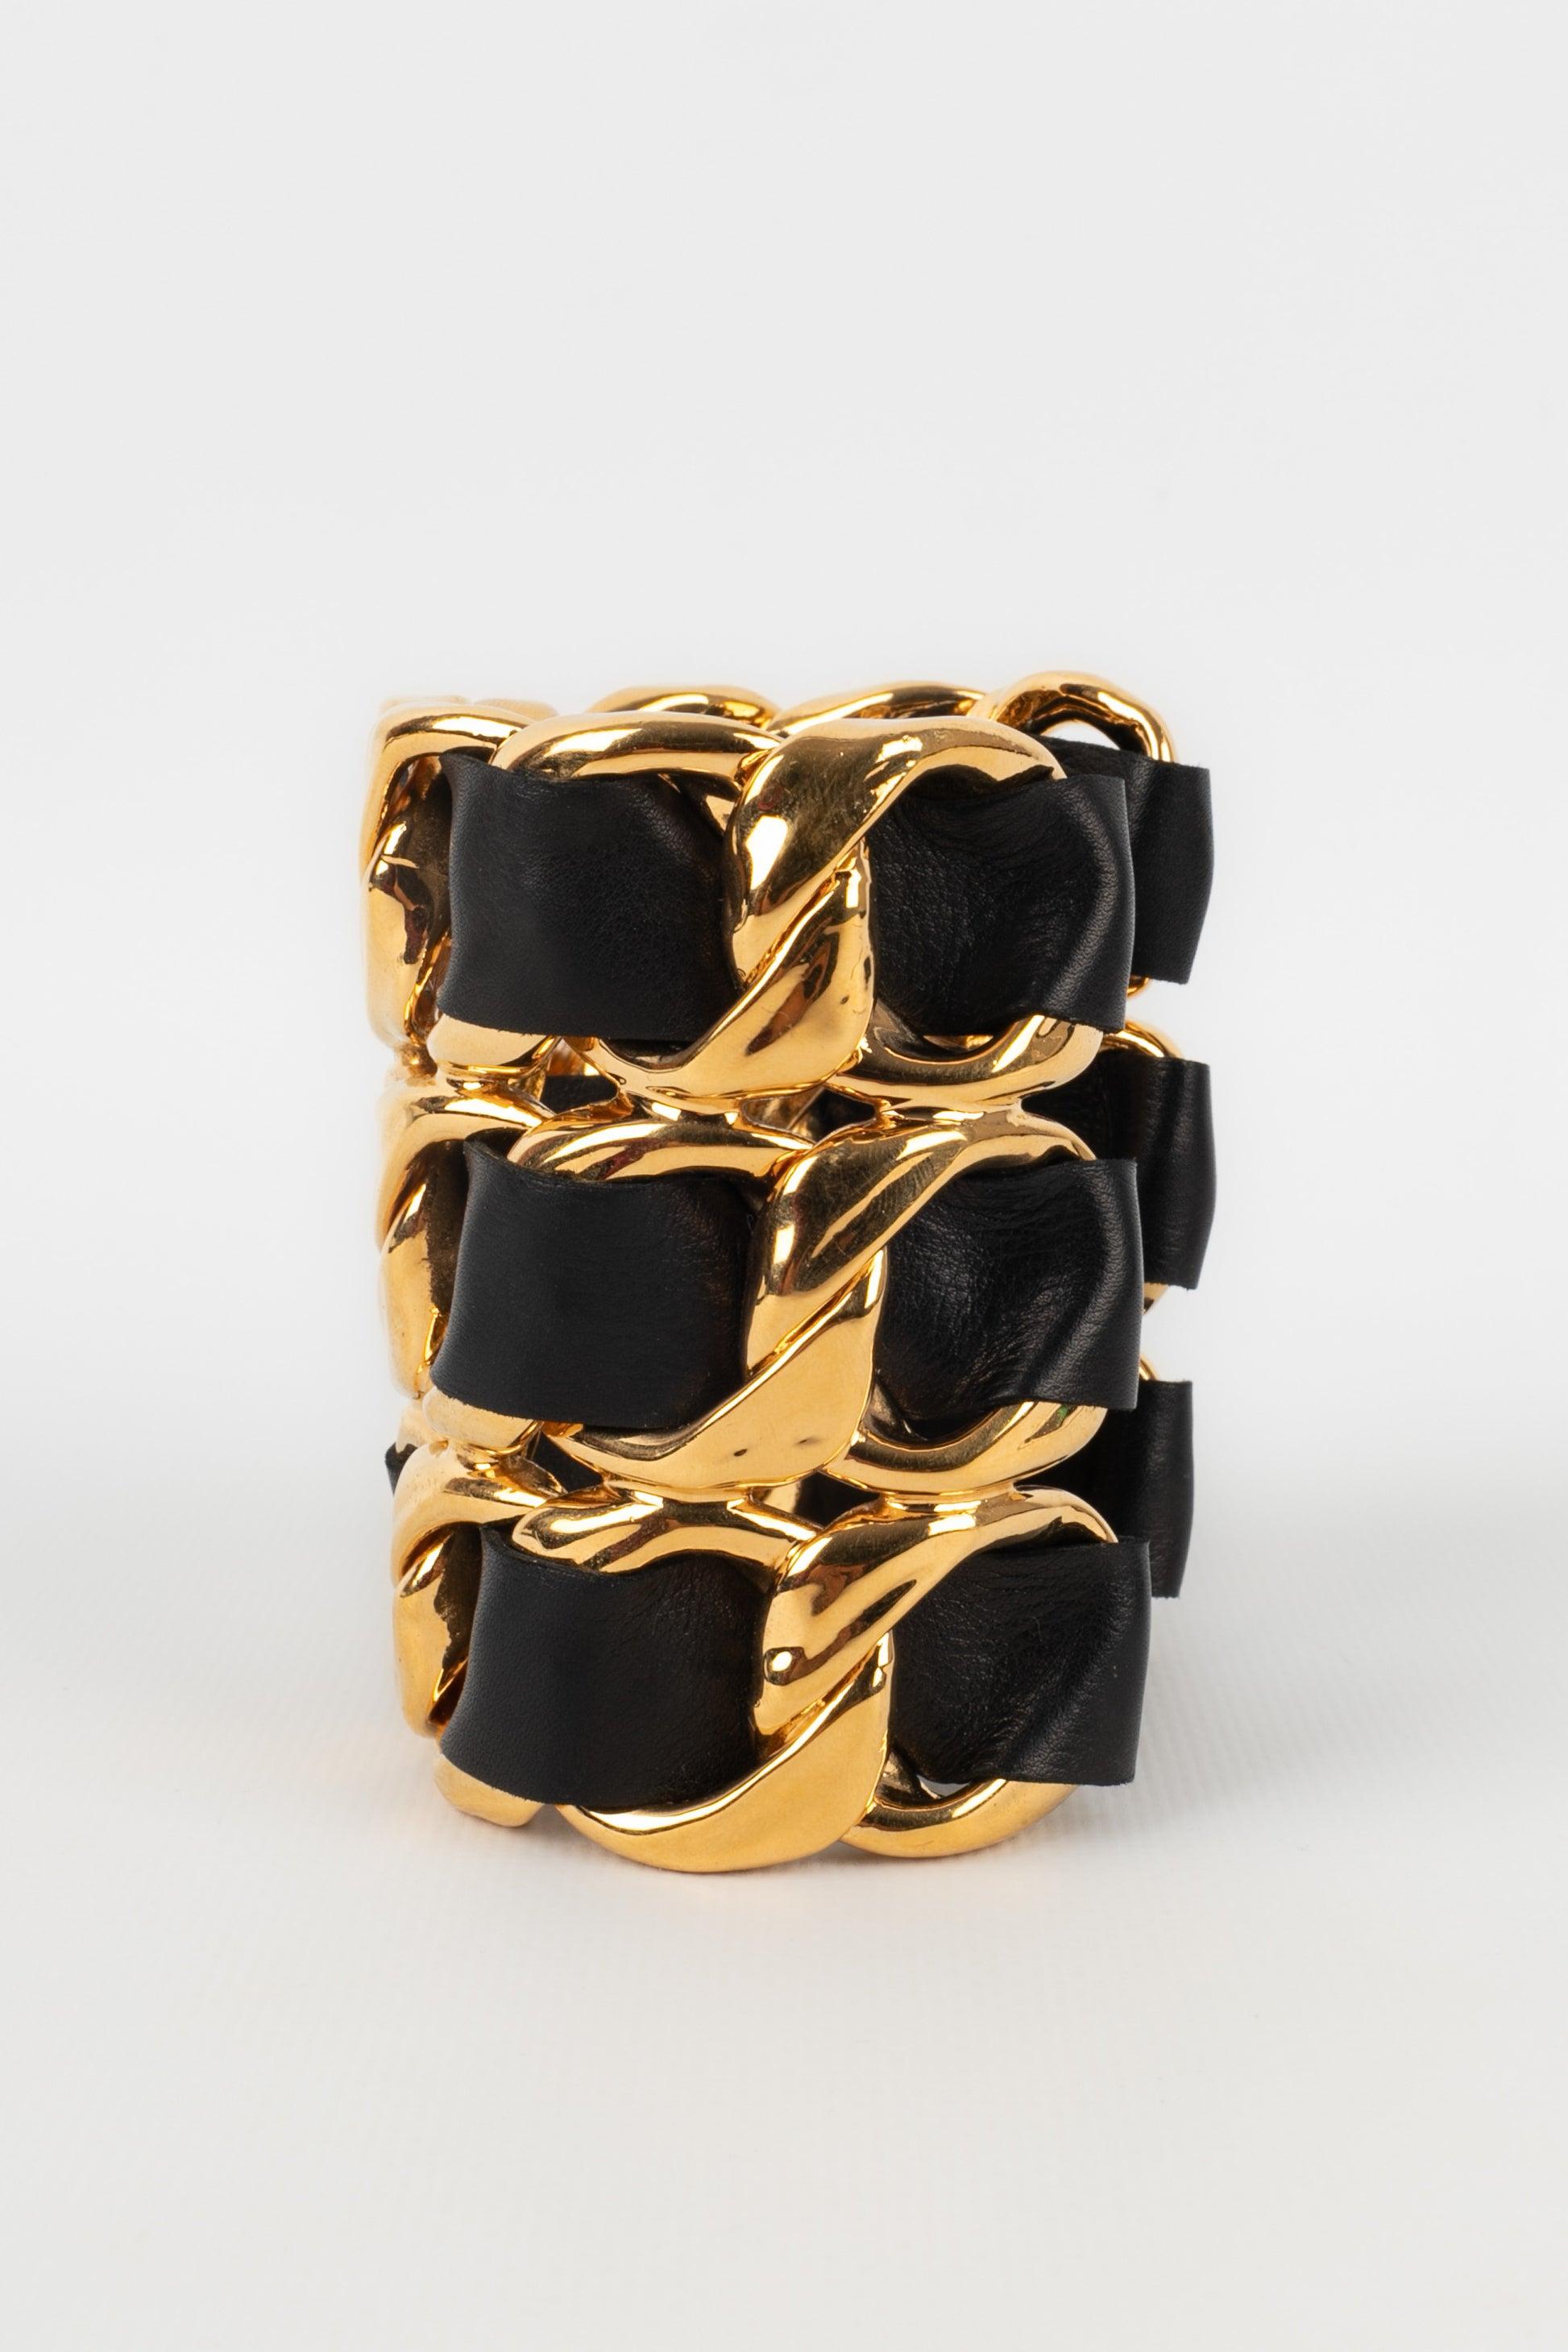 Chanel - (Made in France) Golden metal cuff bracelet with black leather. 2cc3 Collection - from the end of the 1980s.

Additional information:
Condition: Very good condition
Dimensions: Wrist circumference: 14 cm - Opening: 3 cm - Height: 8